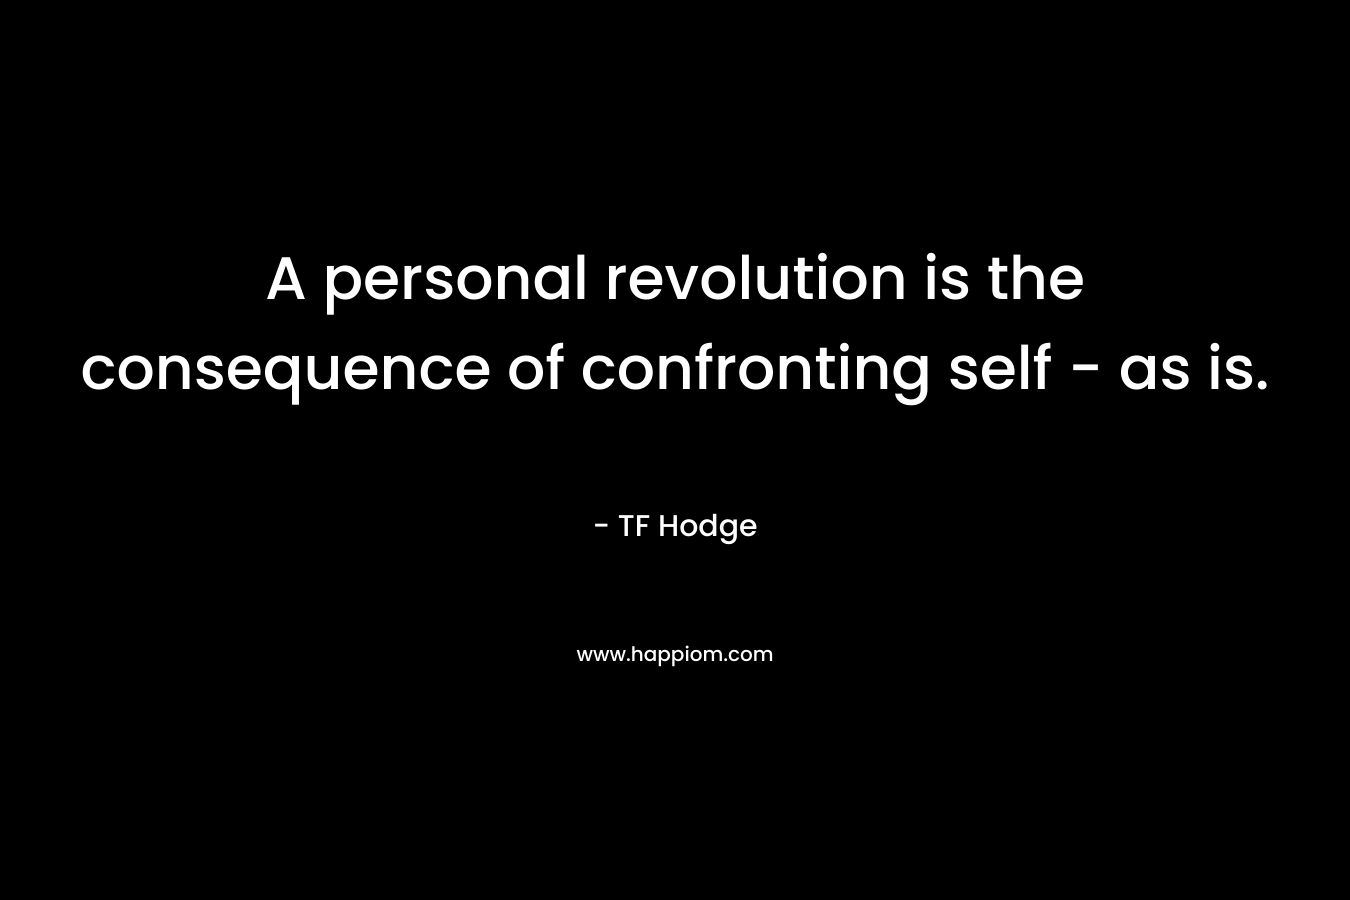 A personal revolution is the consequence of confronting self - as is.